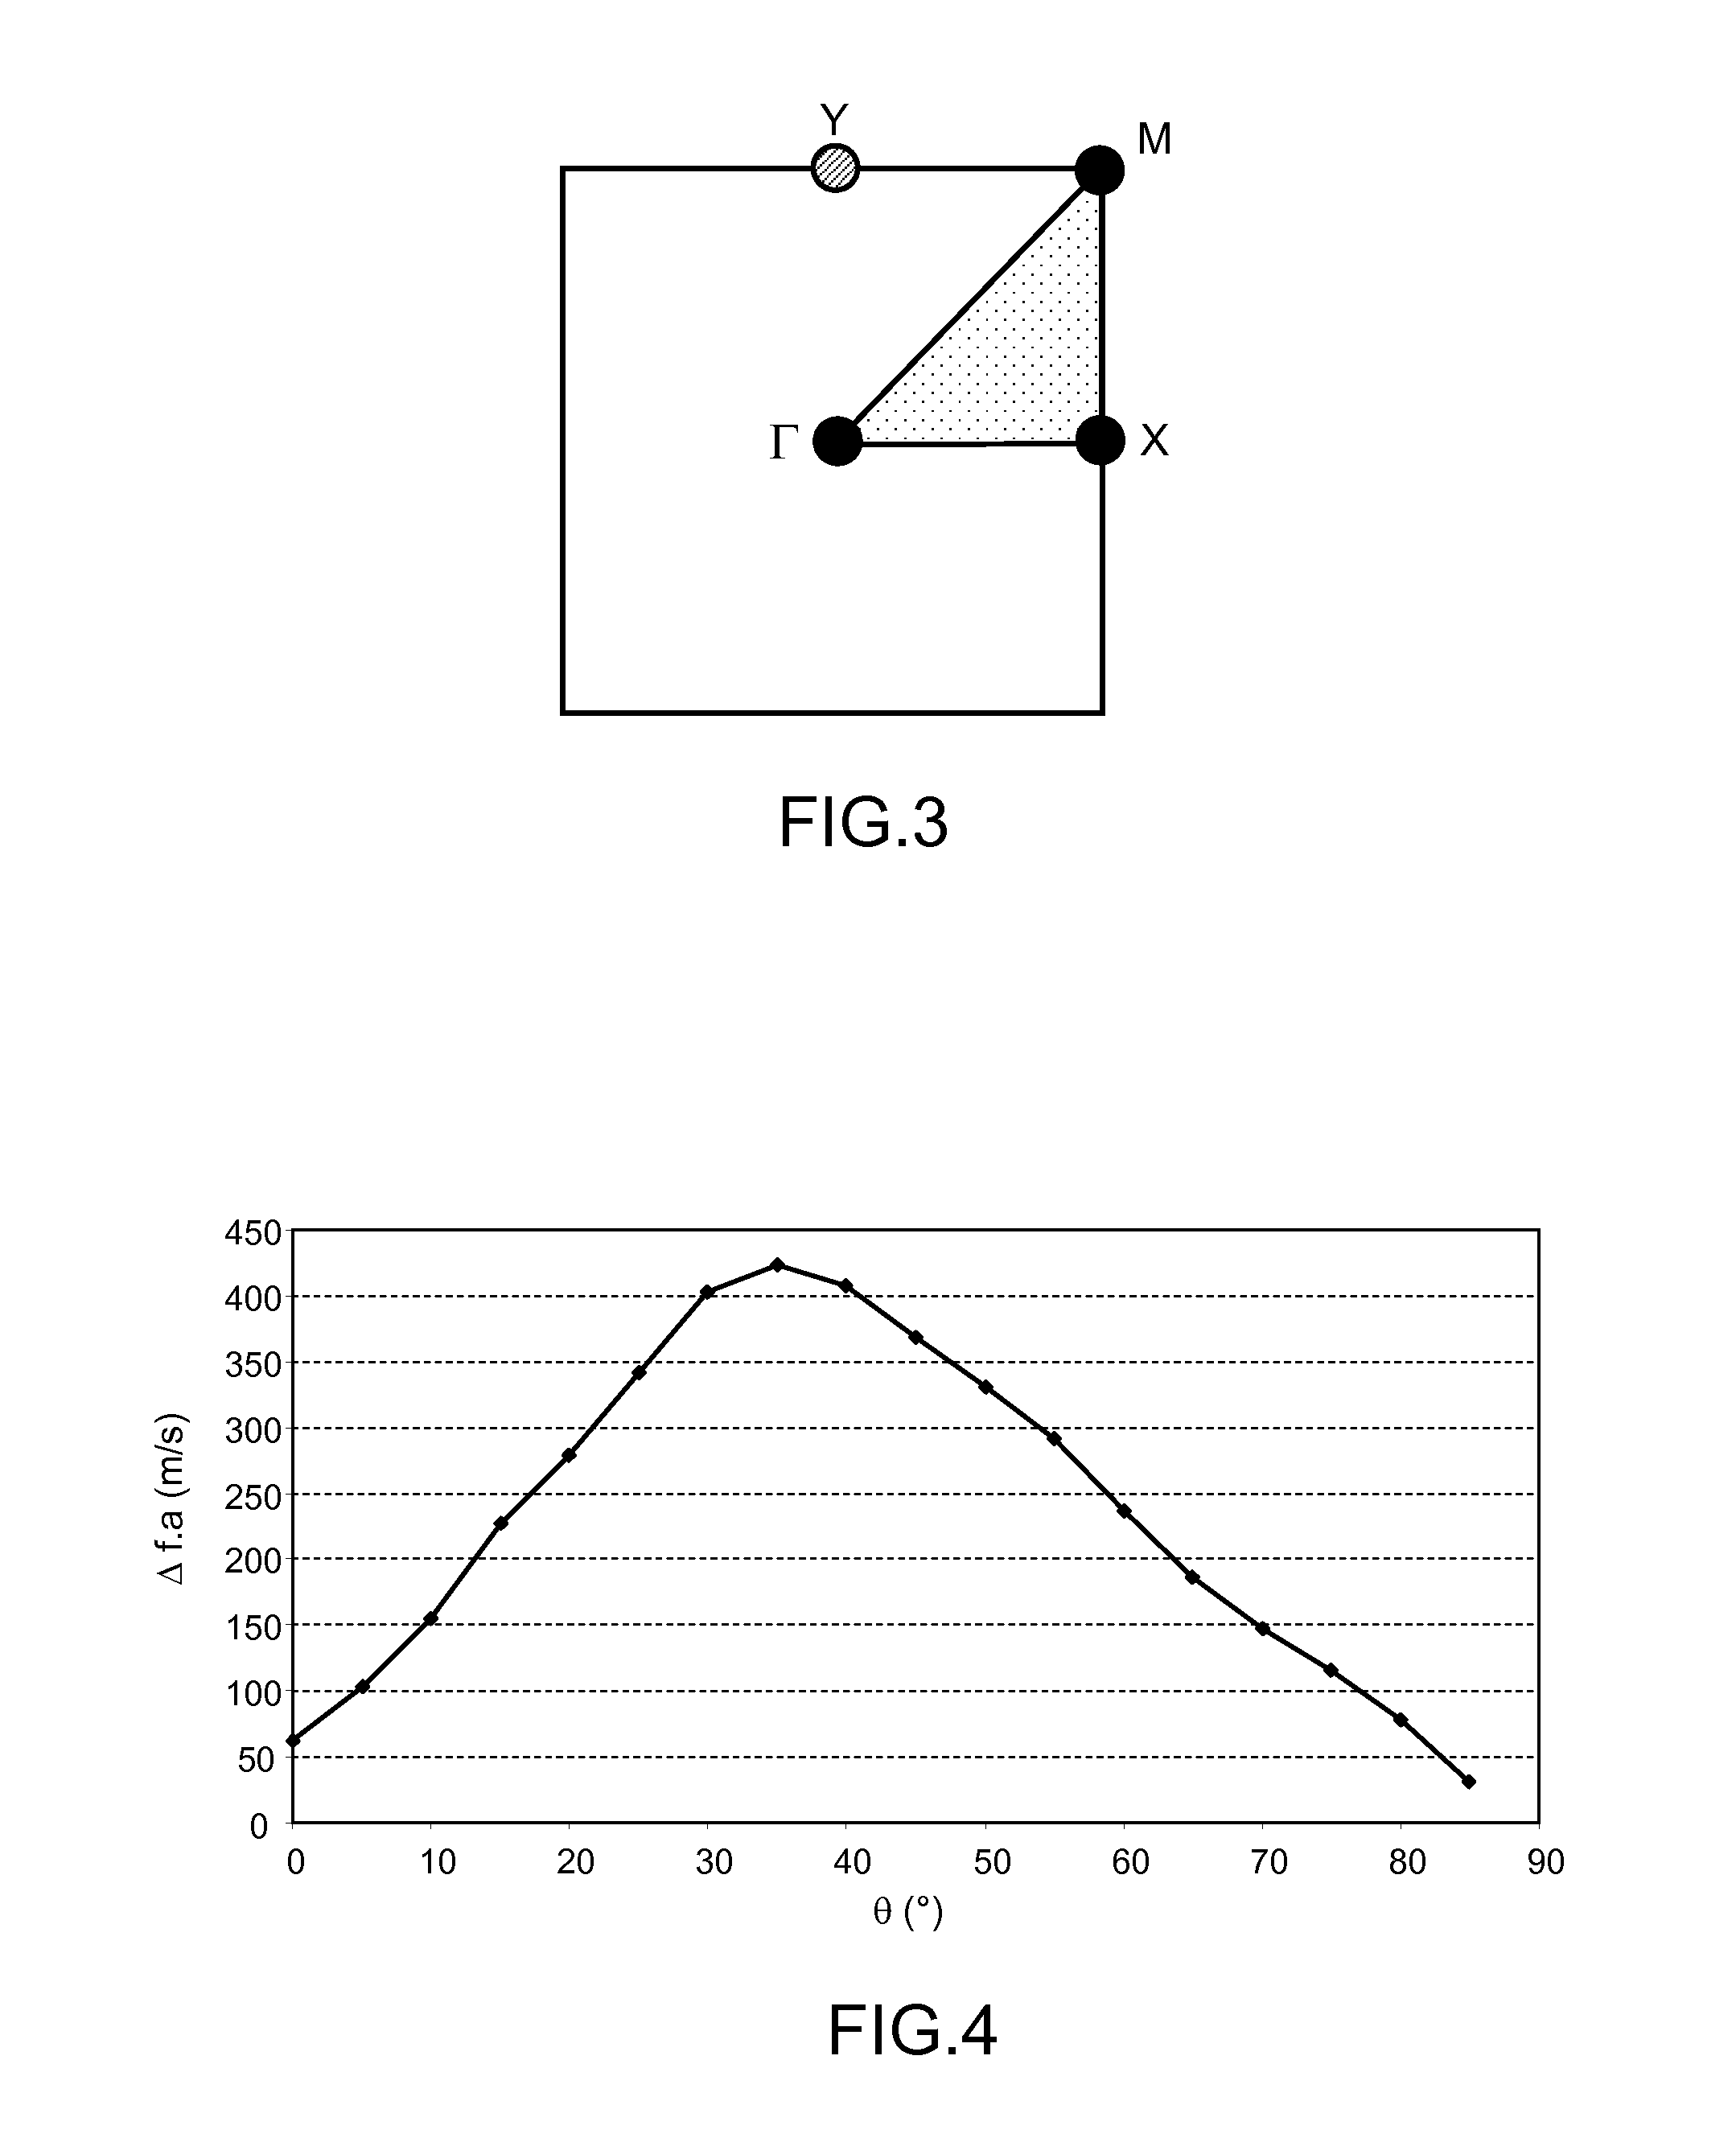 Process for Producing an Acoustic Device Having a Controlled-Bandgap Phononic Crystal Structure Containing Conical Inclusions